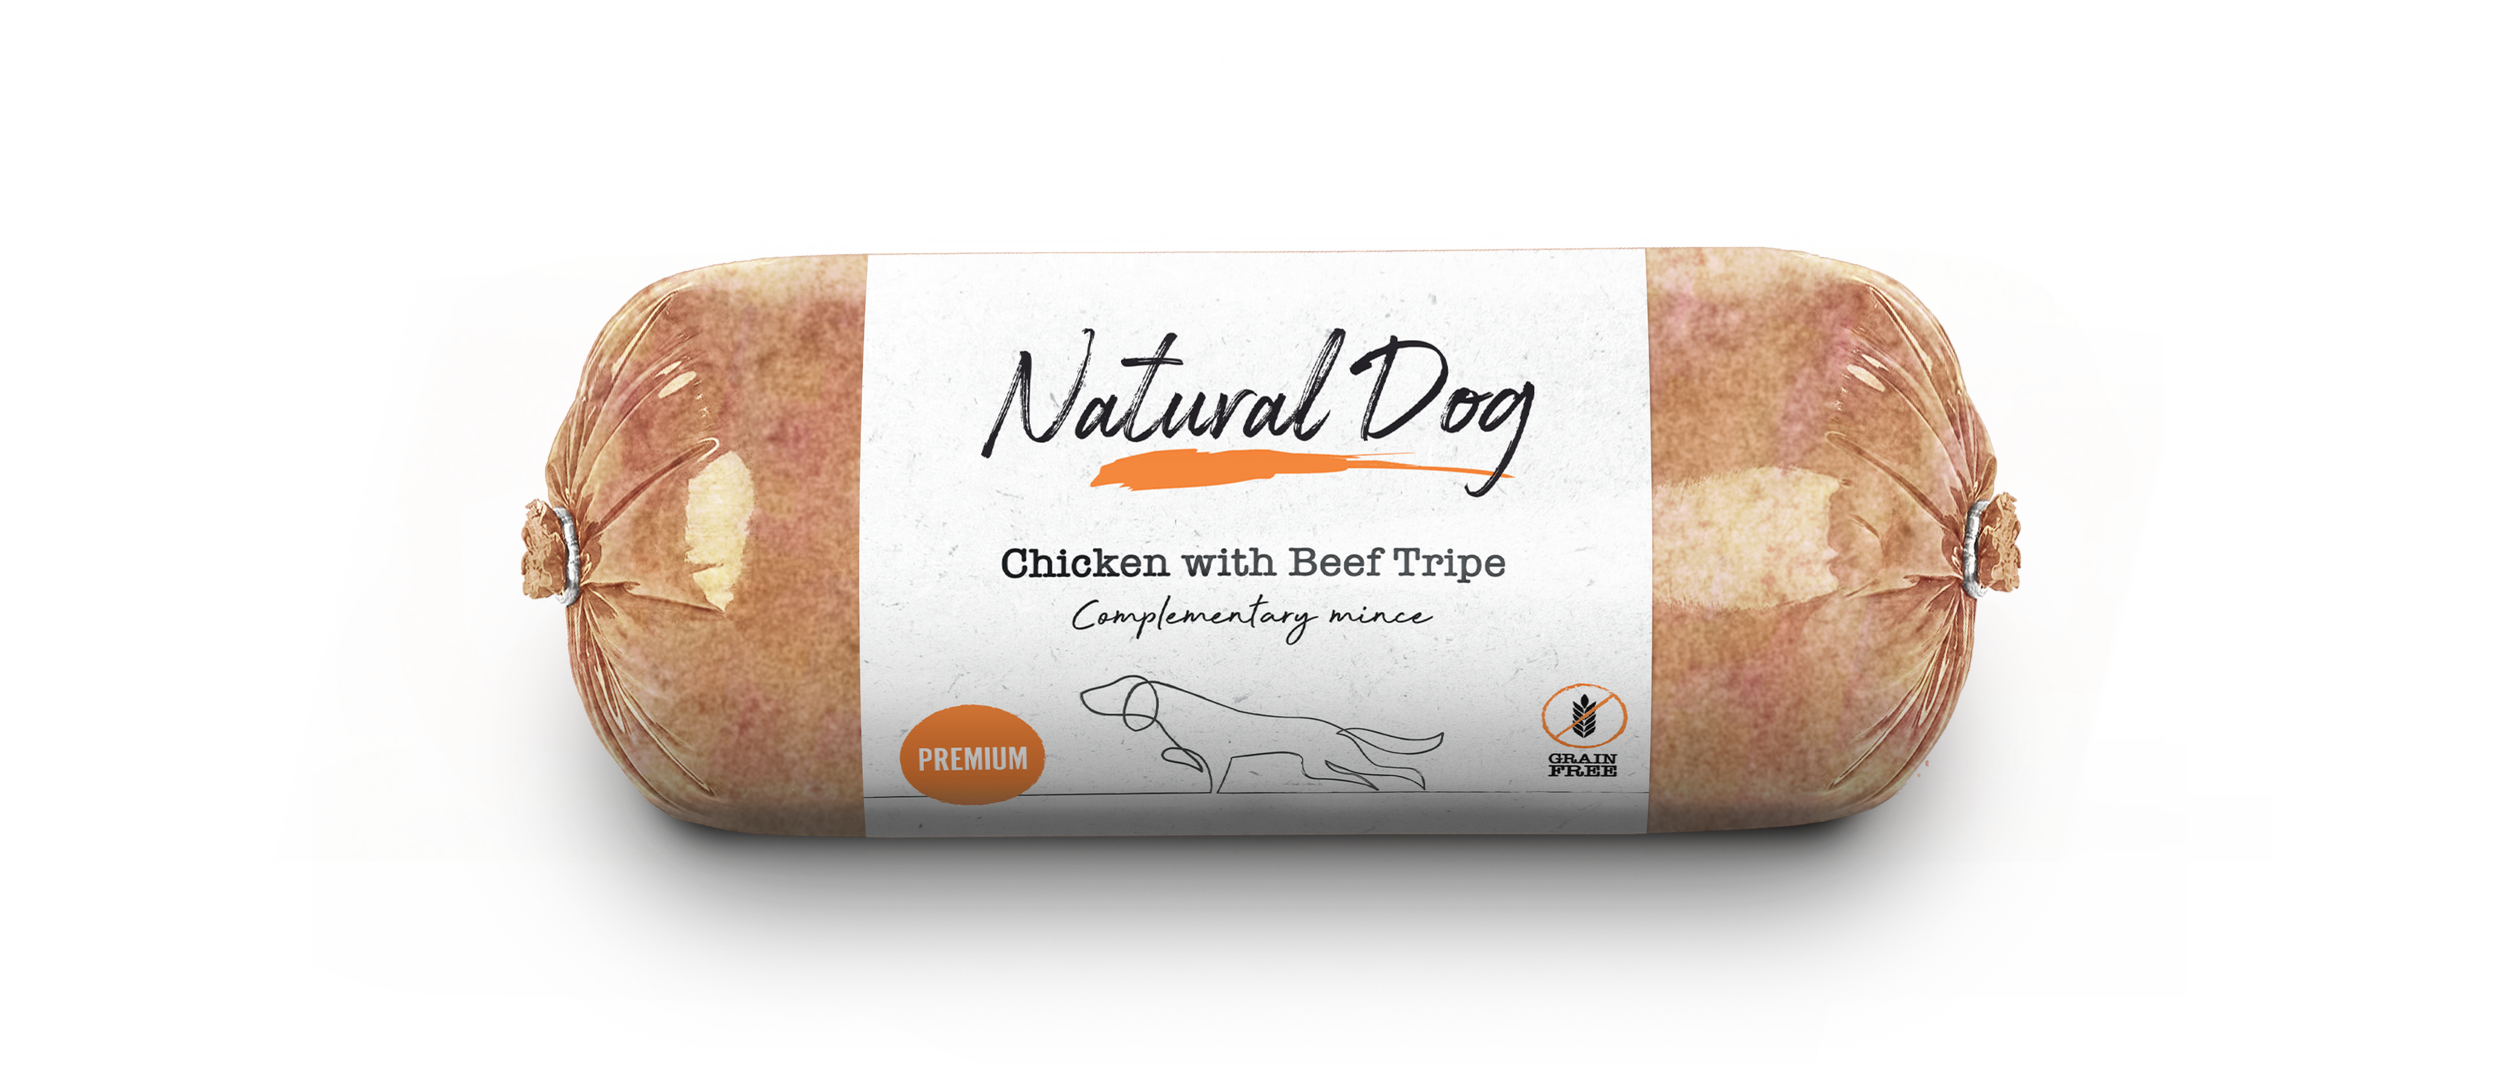 Natural Dog_Top down chub roll_Chicken with Beef.png